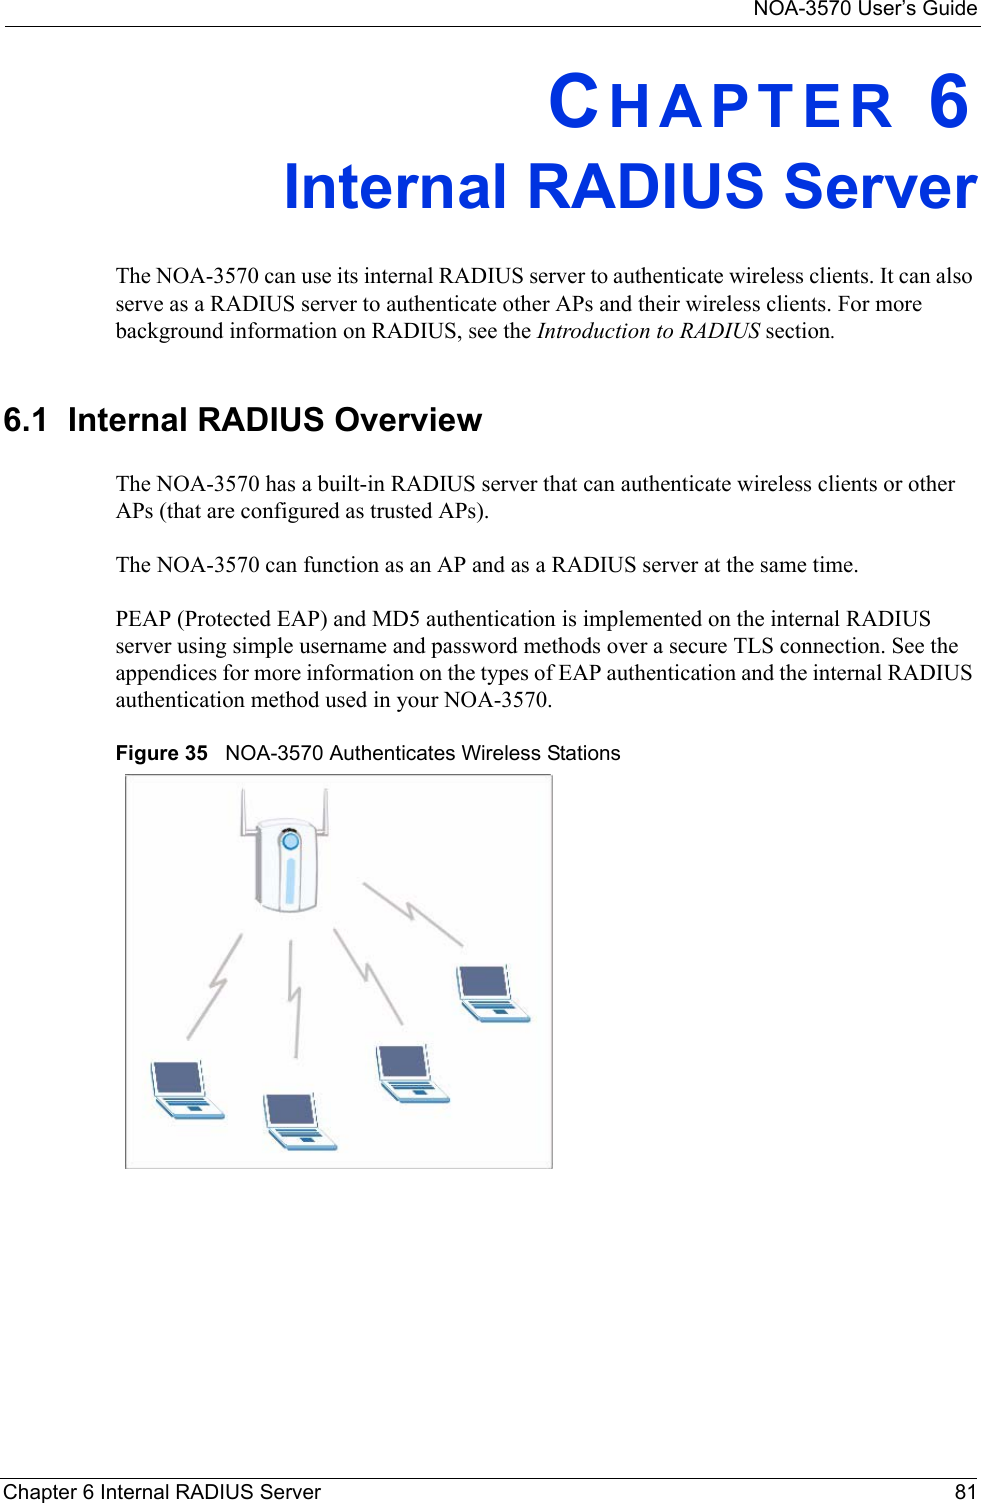 NOA-3570 User’s GuideChapter 6 Internal RADIUS Server 81CHAPTER 6Internal RADIUS ServerThe NOA-3570 can use its internal RADIUS server to authenticate wireless clients. It can also serve as a RADIUS server to authenticate other APs and their wireless clients. For more background information on RADIUS, see the Introduction to RADIUS section.6.1  Internal RADIUS OverviewThe NOA-3570 has a built-in RADIUS server that can authenticate wireless clients or other APs (that are configured as trusted APs).The NOA-3570 can function as an AP and as a RADIUS server at the same time.PEAP (Protected EAP) and MD5 authentication is implemented on the internal RADIUS server using simple username and password methods over a secure TLS connection. See the appendices for more information on the types of EAP authentication and the internal RADIUS authentication method used in your NOA-3570. Figure 35   NOA-3570 Authenticates Wireless Stations